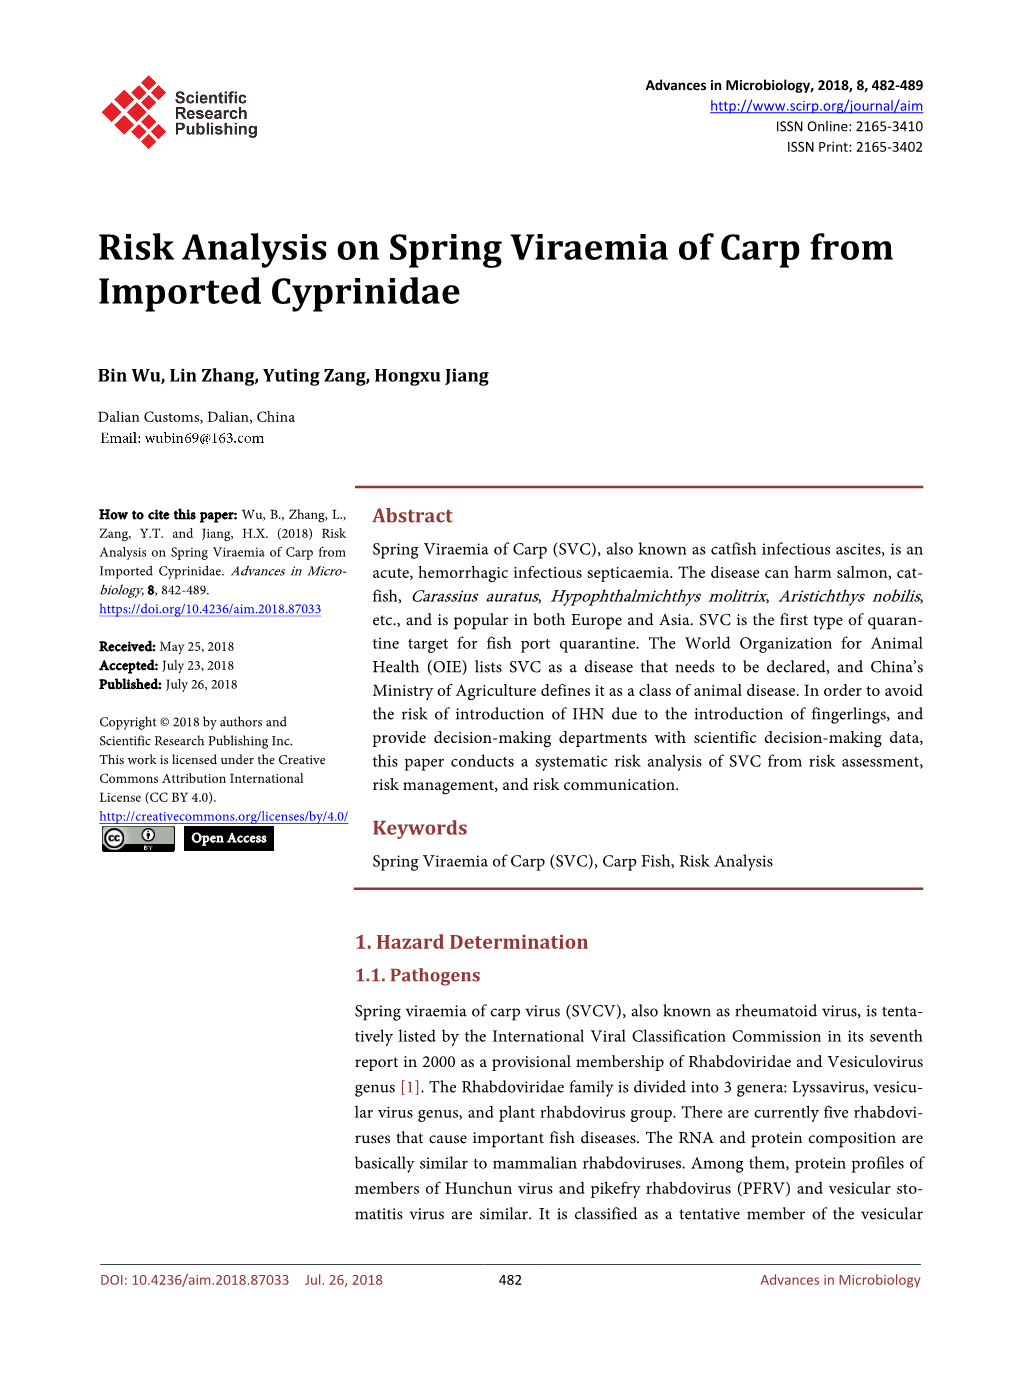 Risk Analysis on Spring Viraemia of Carp from Imported Cyprinidae